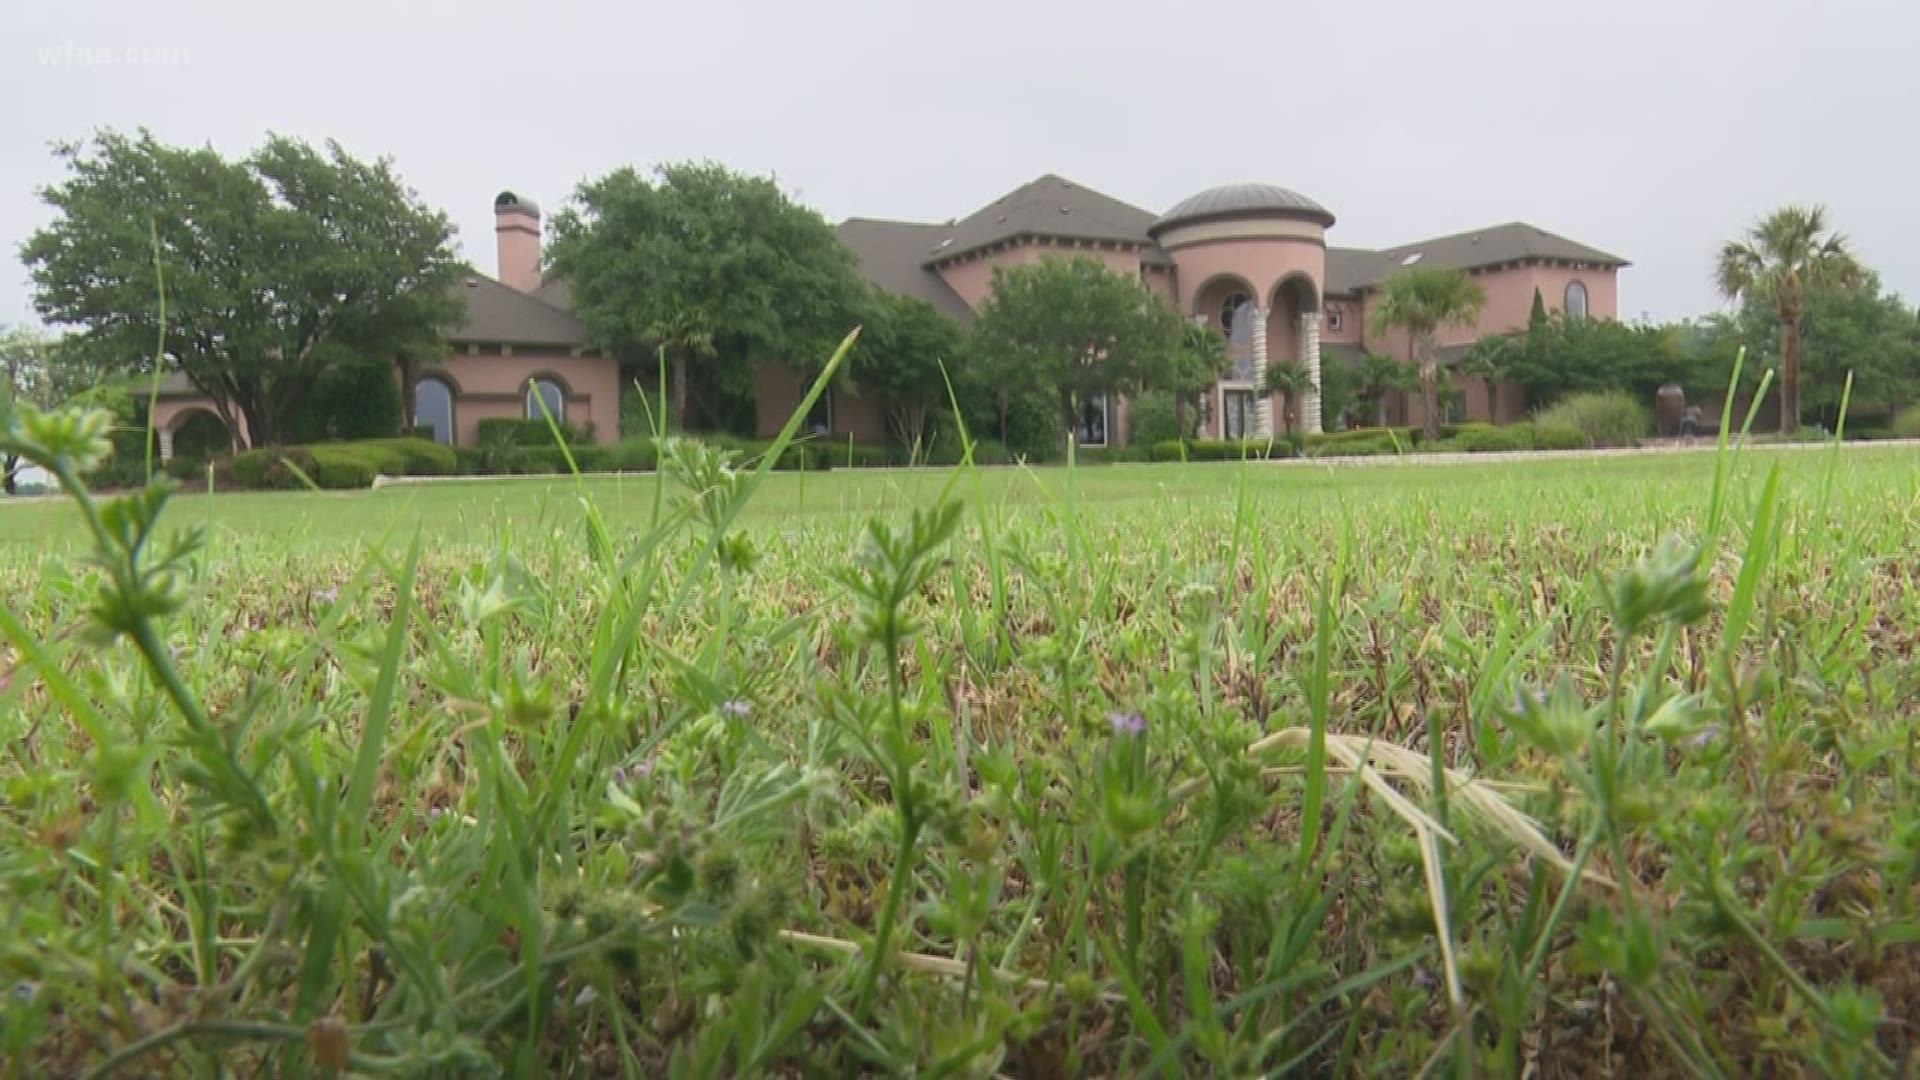 Deion Sanders' home for up auction